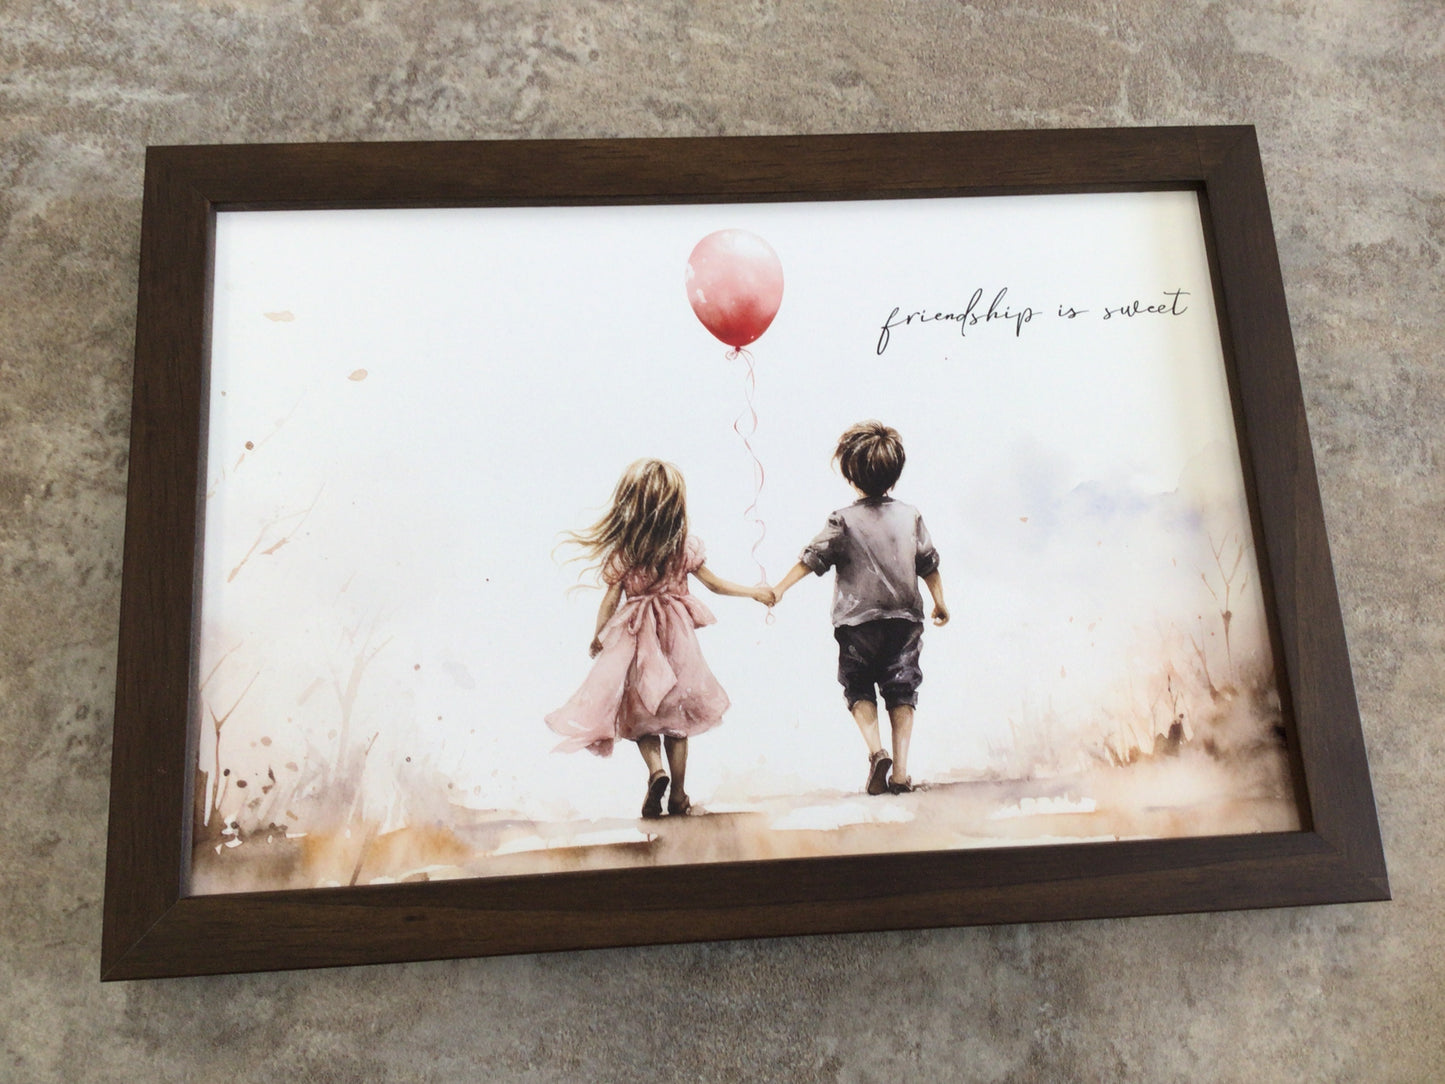 WHD - Frienship Framed Sign